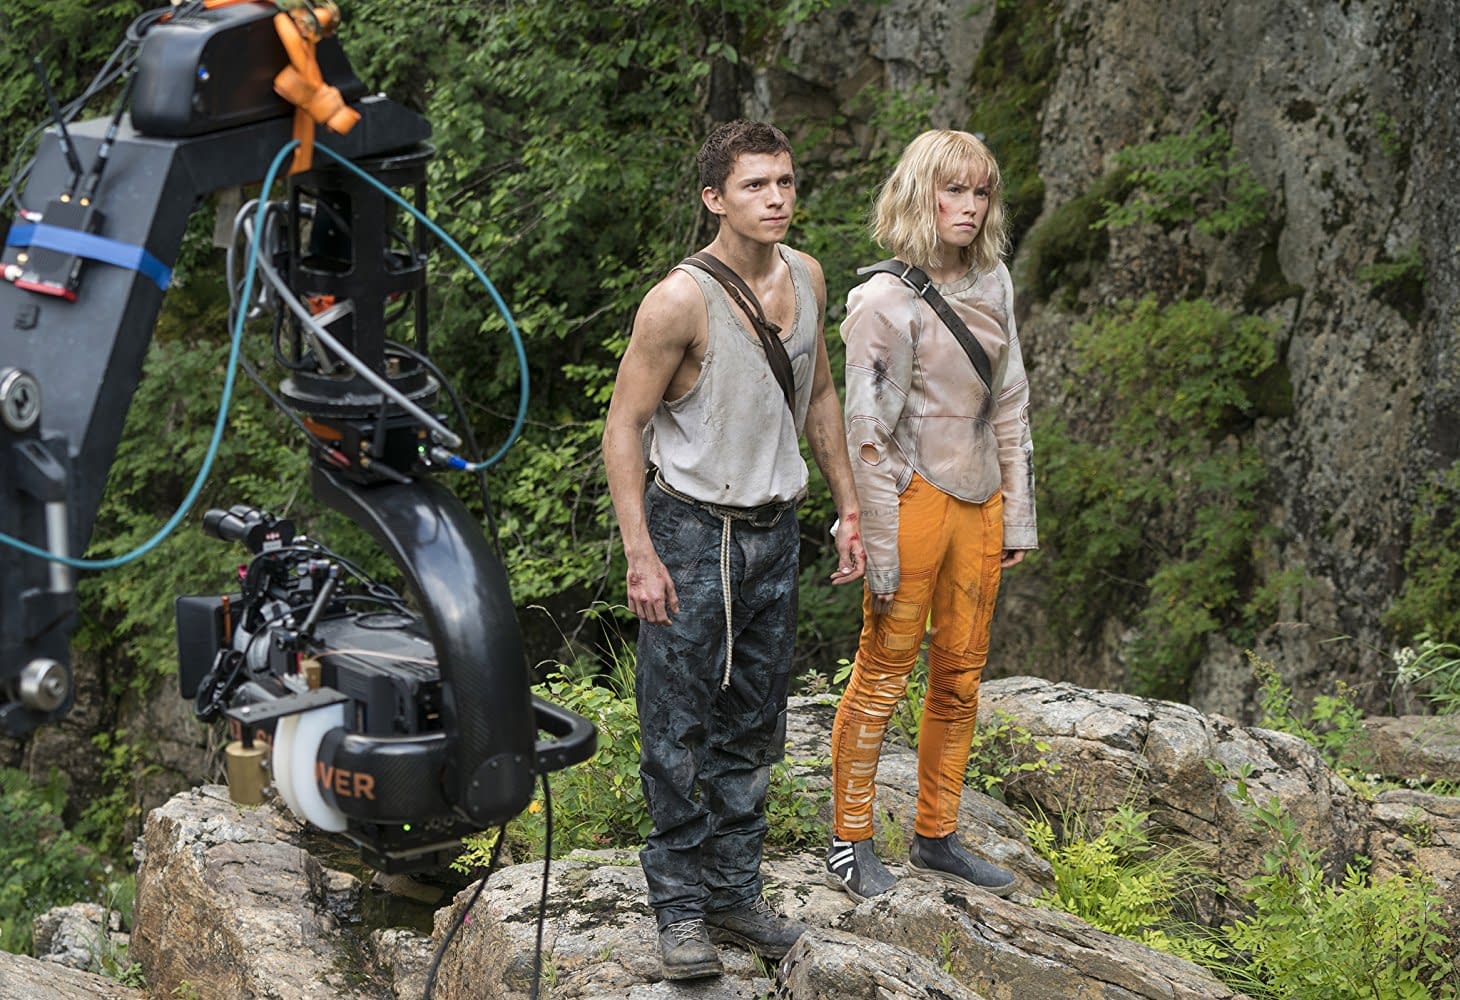 Chaos Walking Is the Latest Big Budget Movie to Get Extensive Reshoots